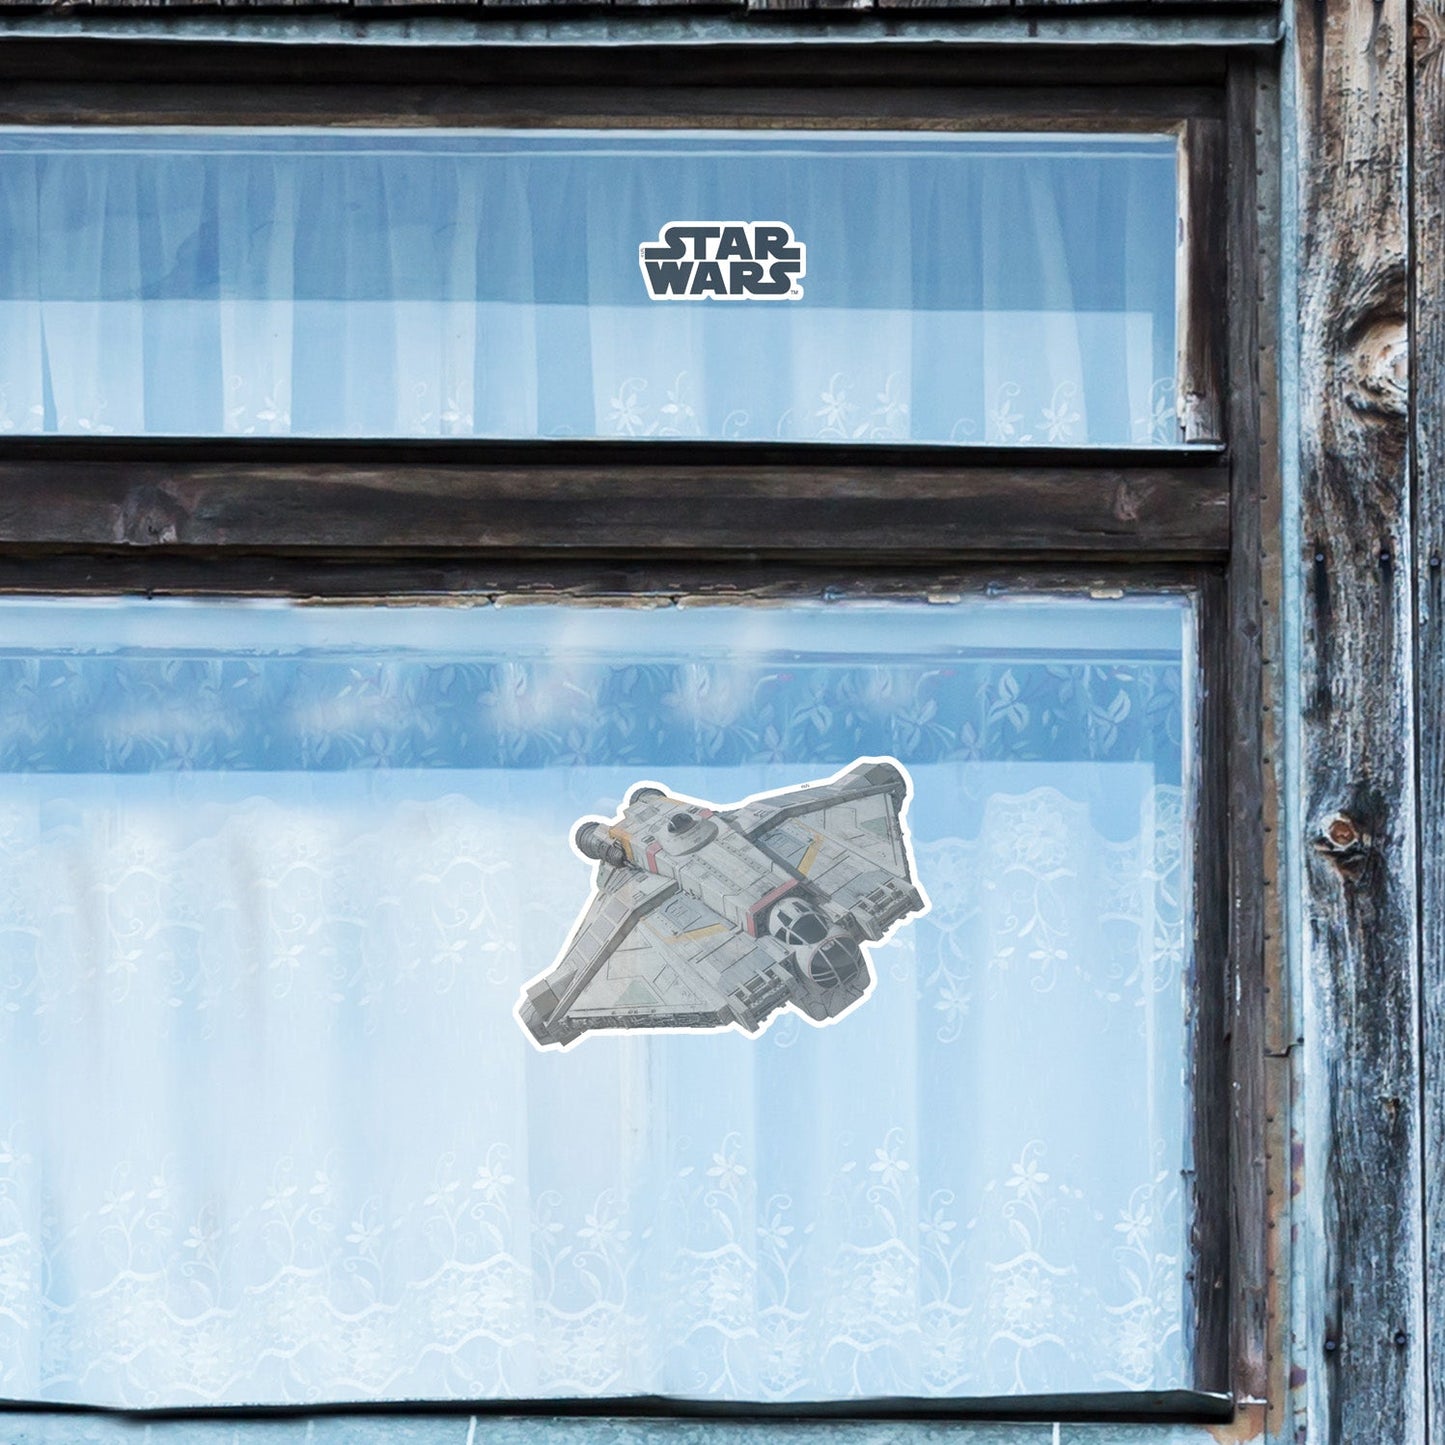 The Ghost Window Clings - Officially Licensed Star Wars Removable Window Static Decal